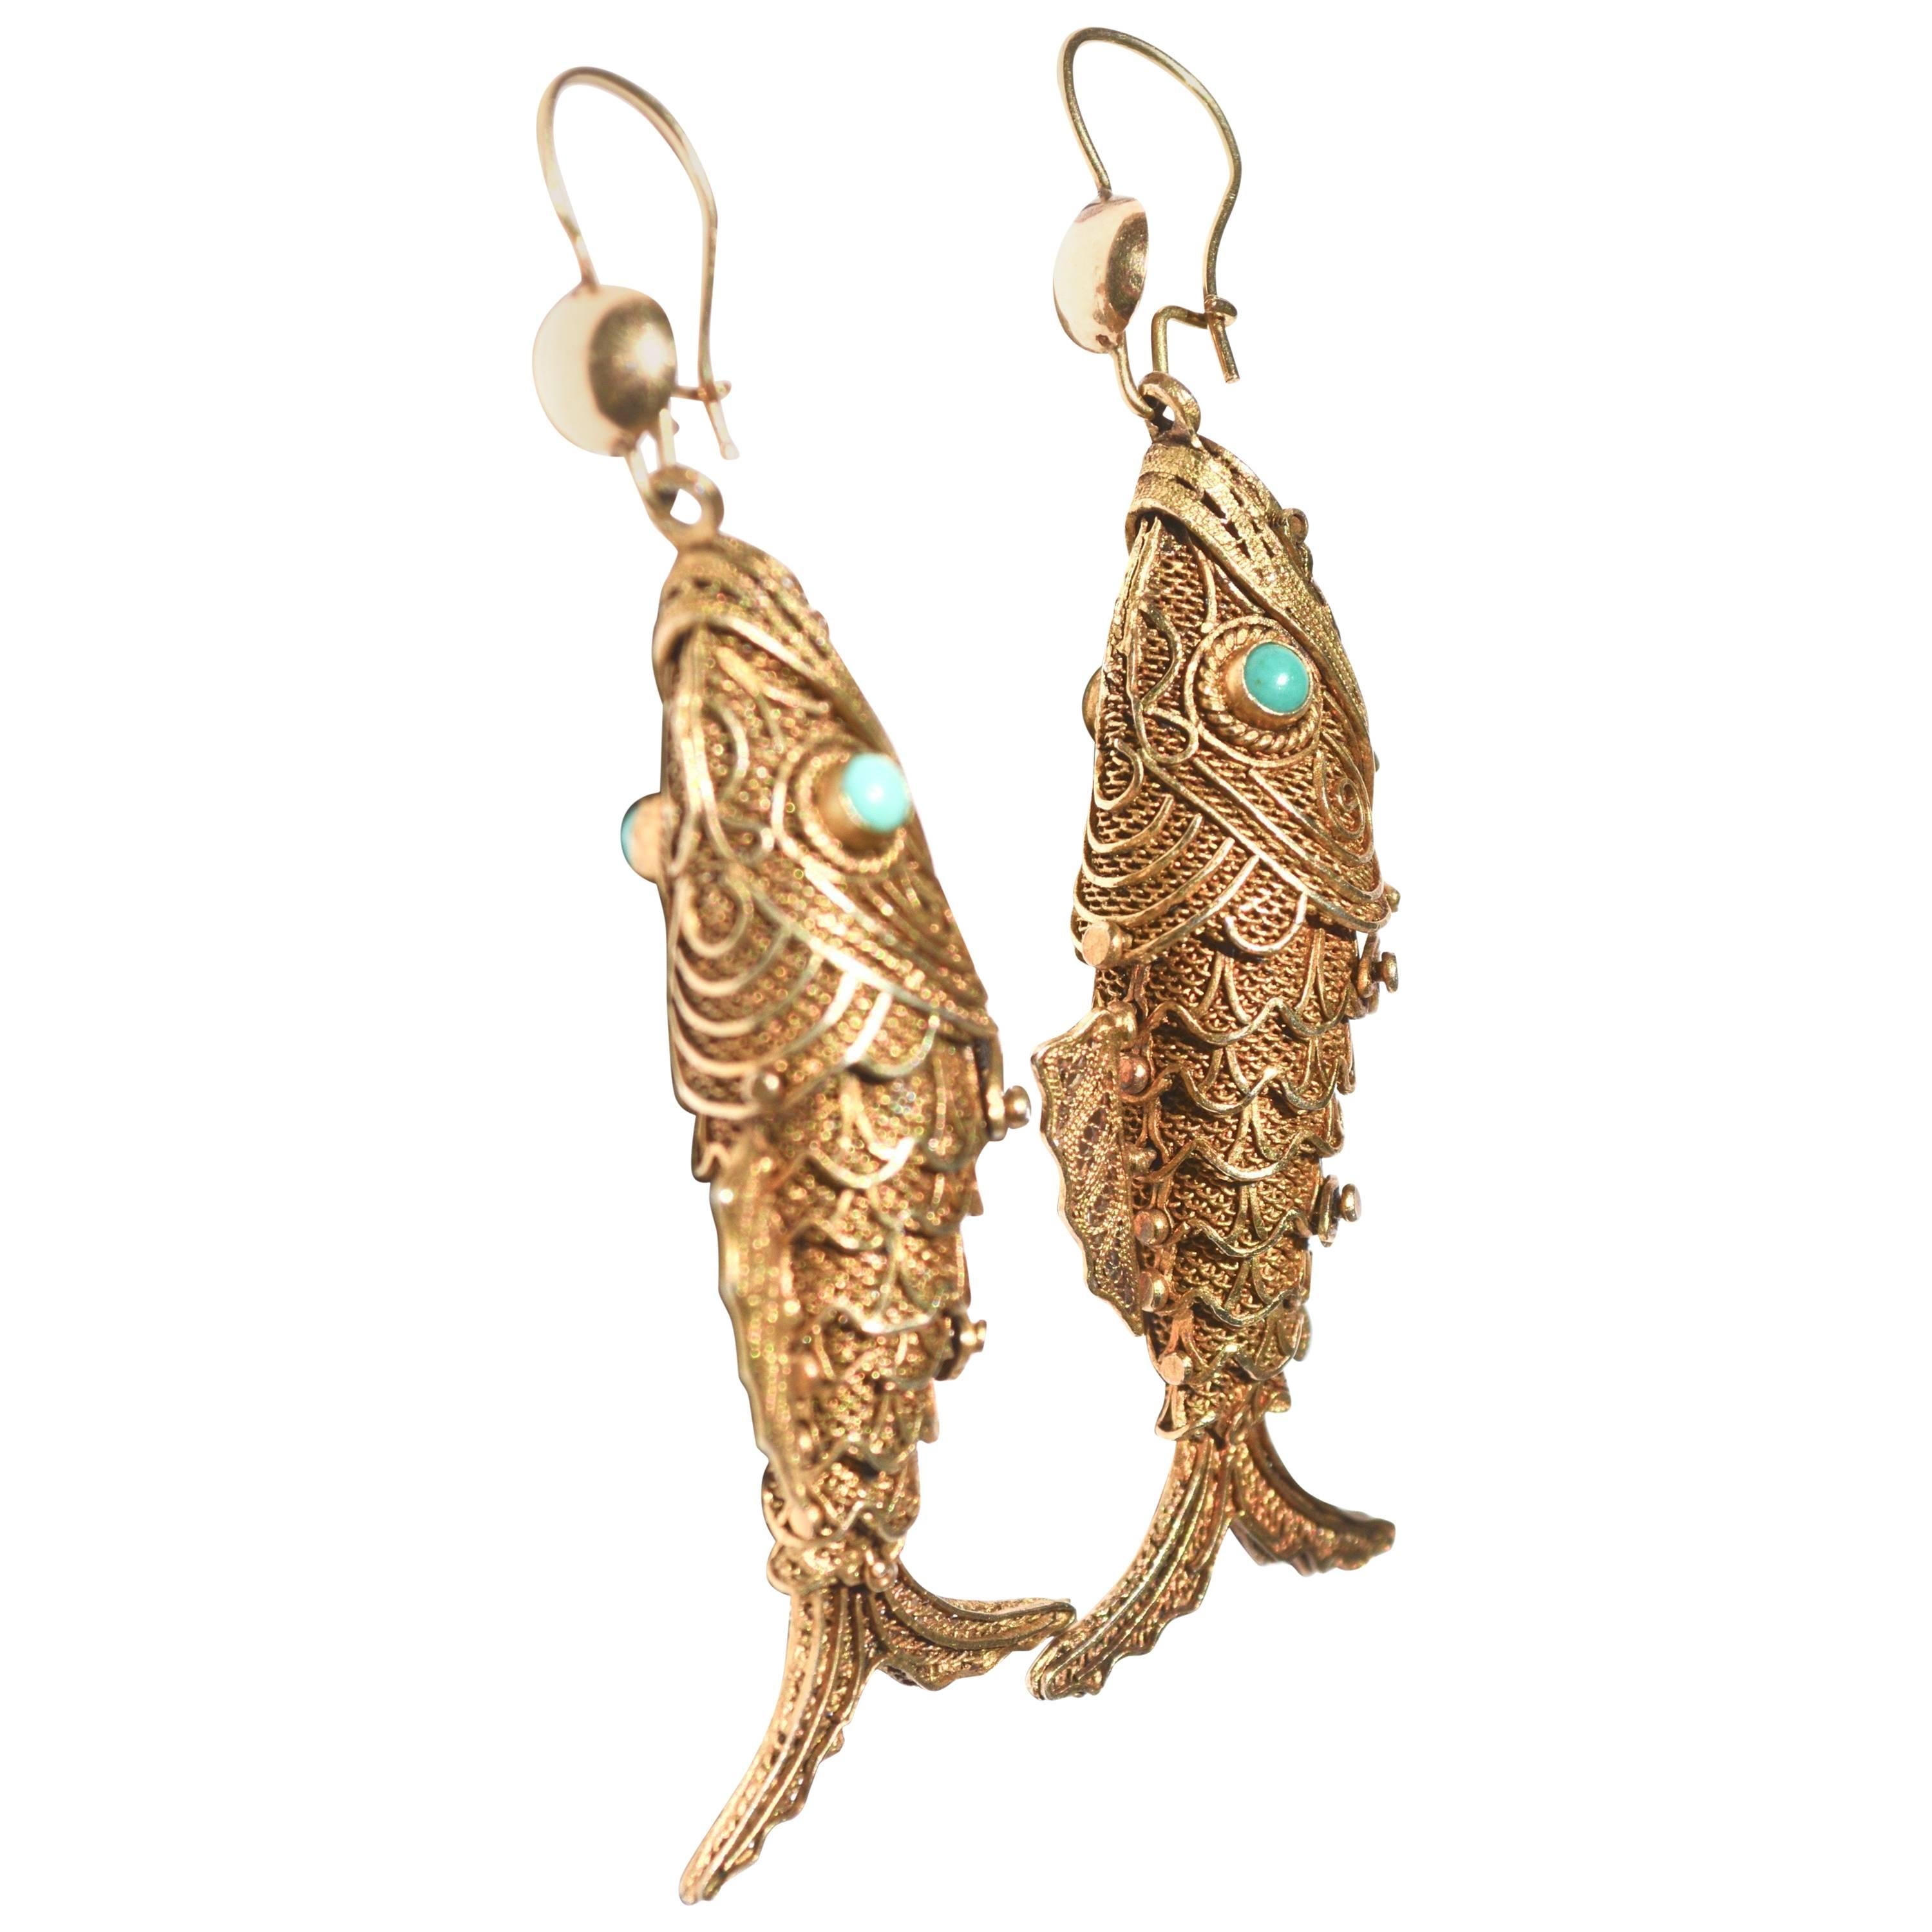 Vermeil, Turquoise, and 14k Fish earrings